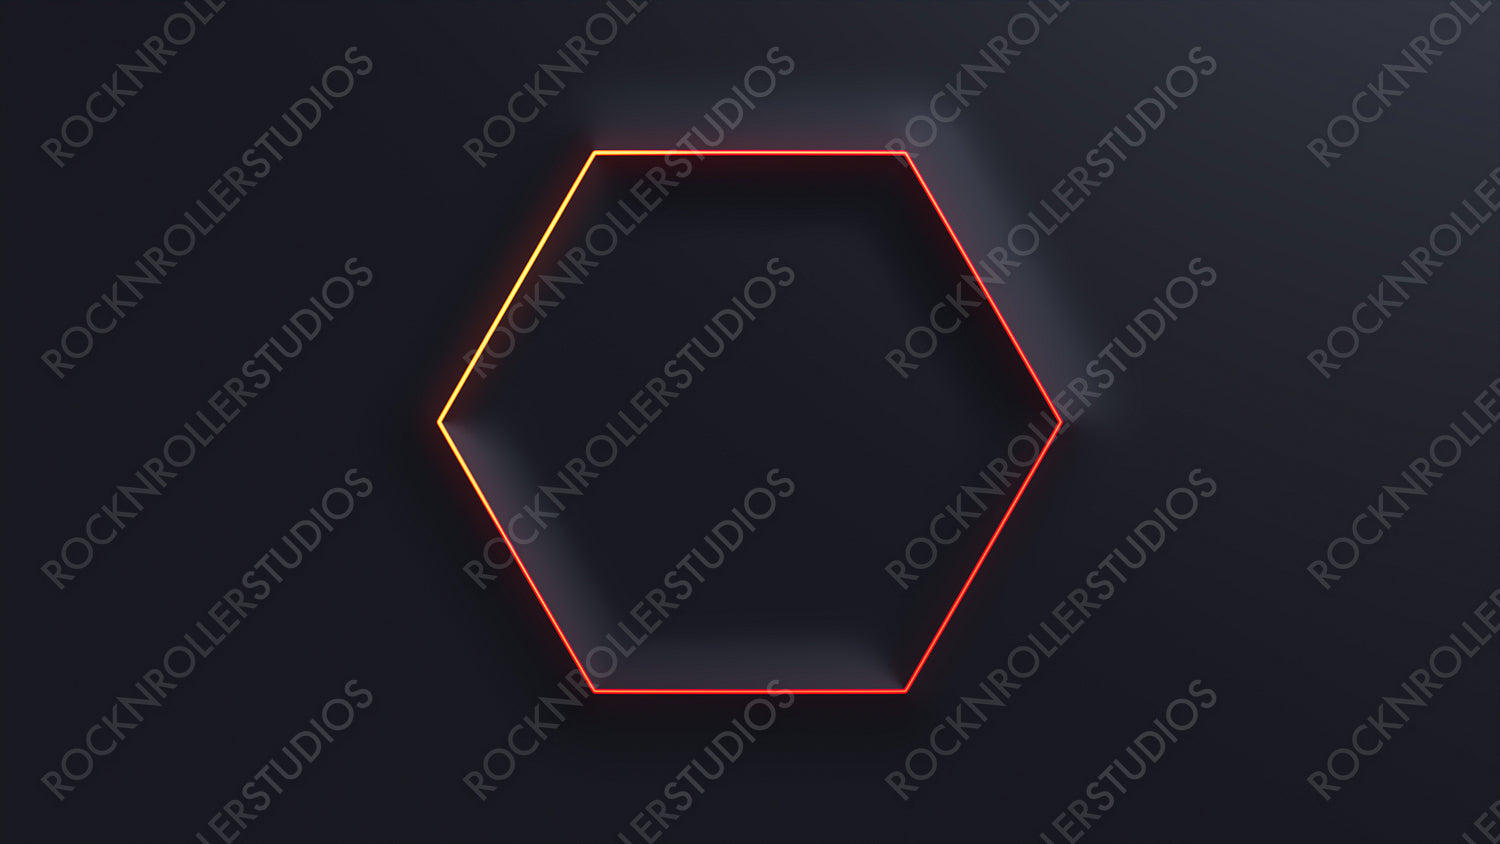 Minimalist Tech Background with Raised Hexagon and Orange Illuminated Trim. Black Surface with Embossed 3D Shape. 3D Render.